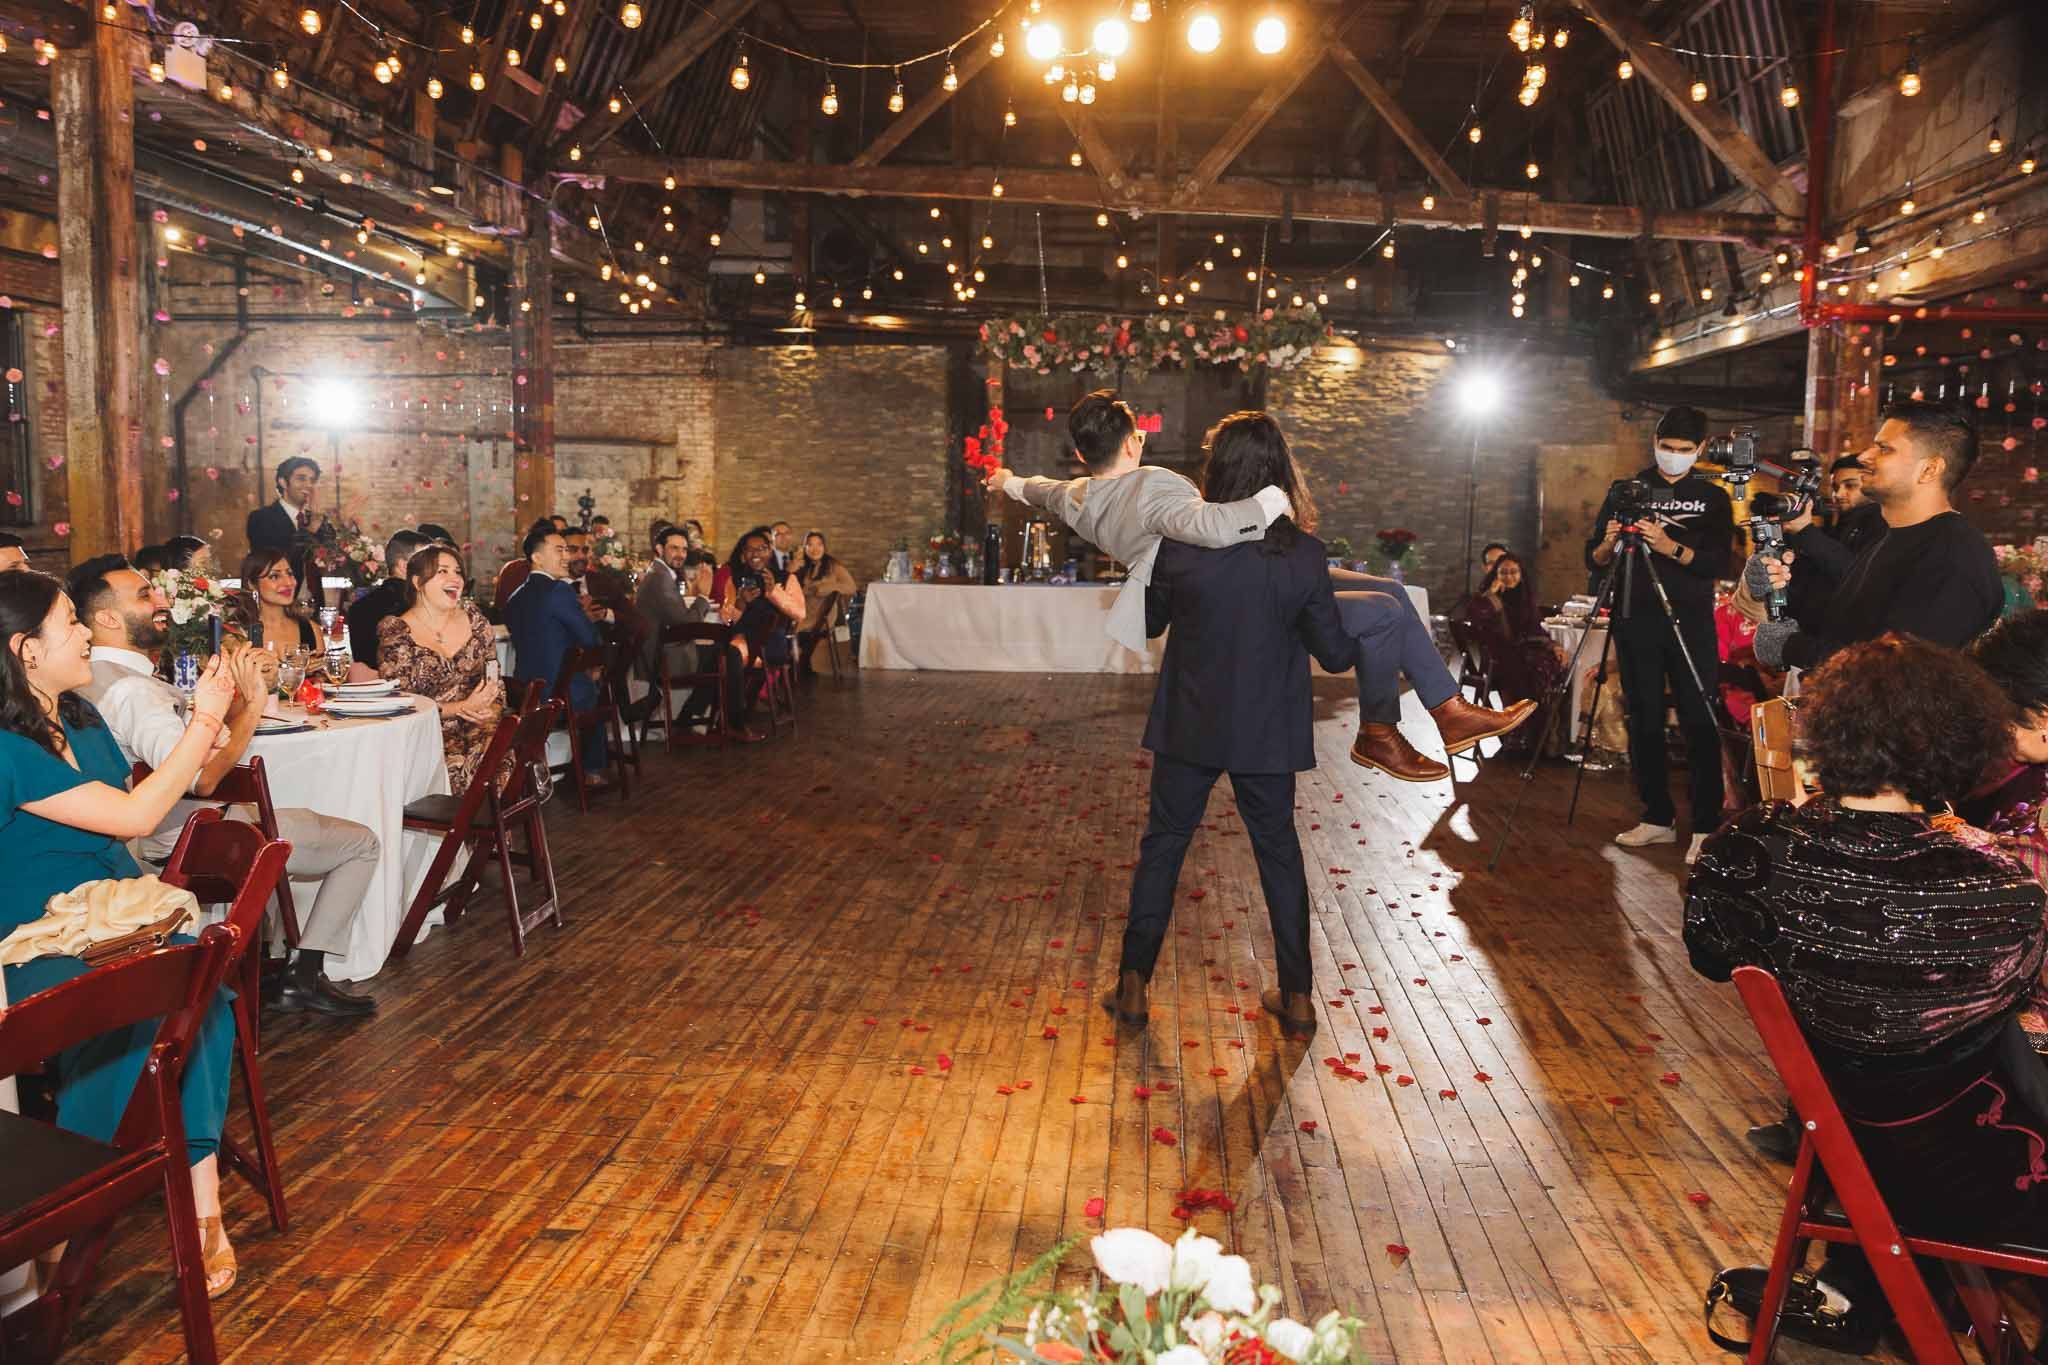 Couple Dancing, Couple Dancing with Guests at Wedding, Wedding Party at Greenpoint Loft